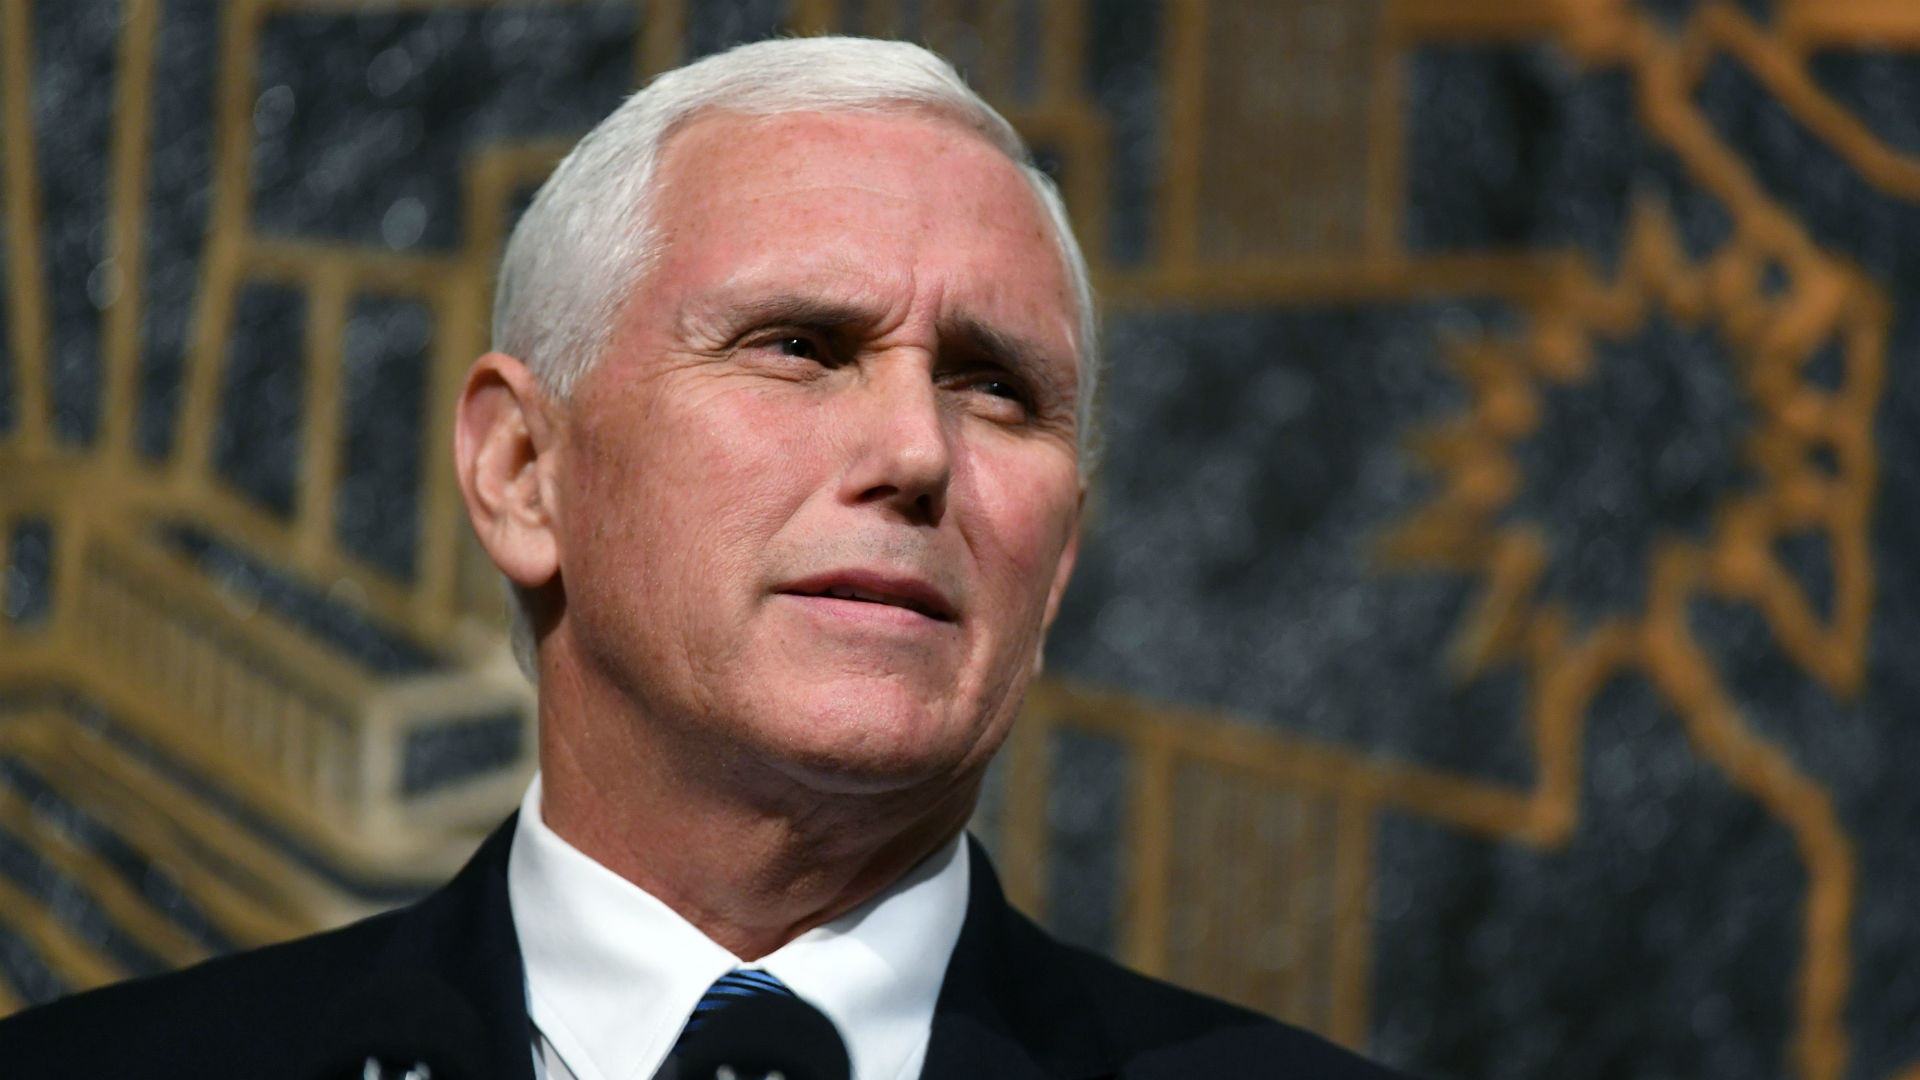 Mike Pence bailing on Colts-49ers looked like nothing more than a PR stunt